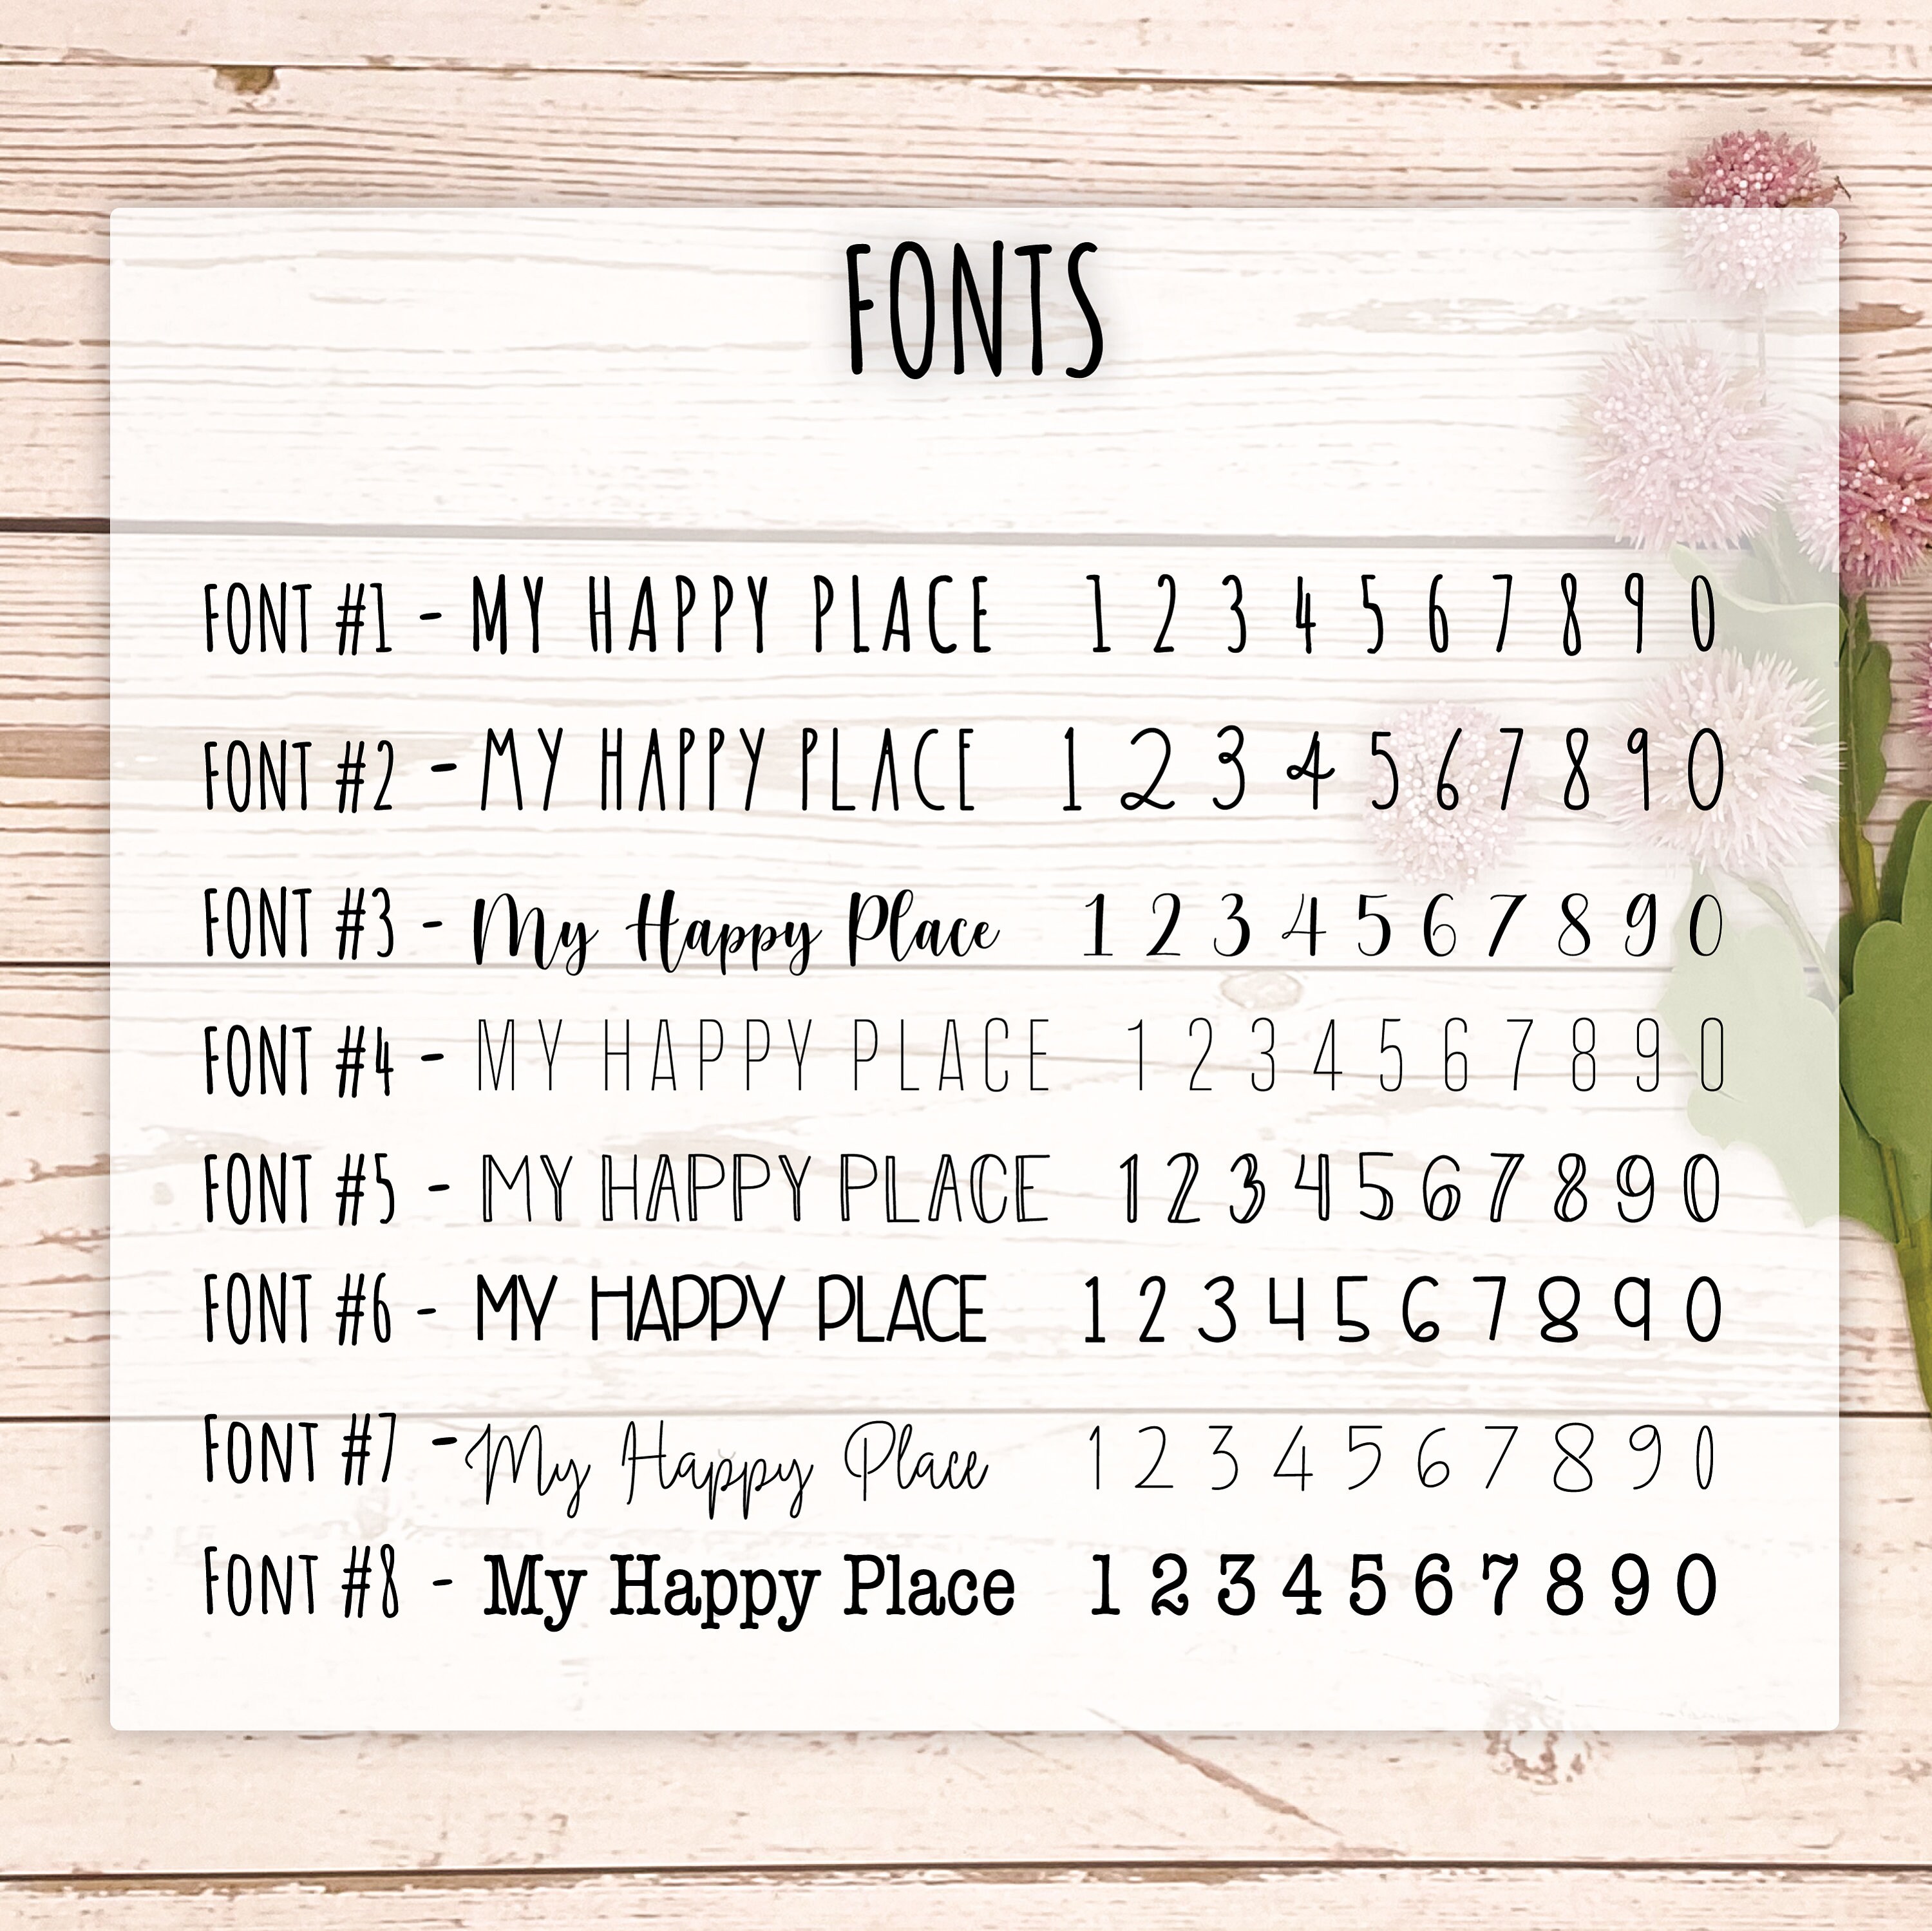 Months, Days, and Number Stickers for Planners, Organizers and Bullet